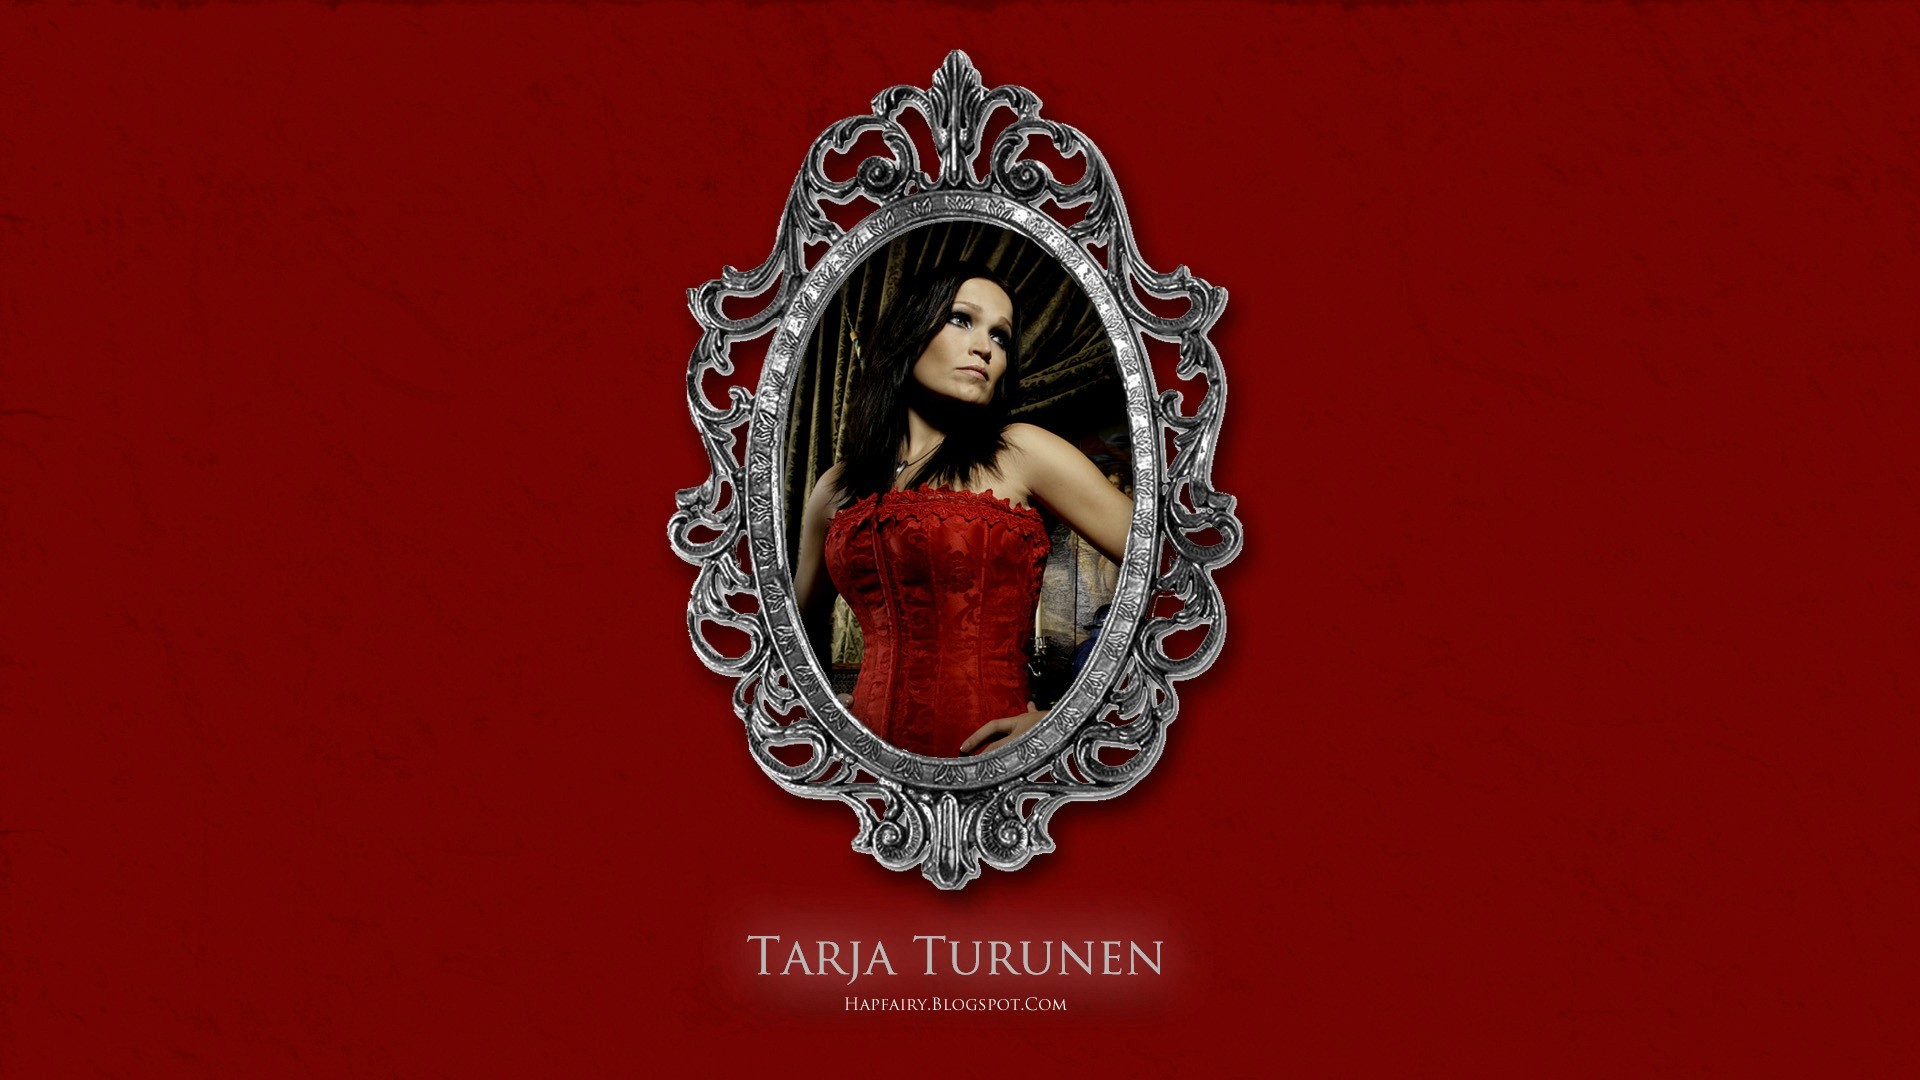 1920x1080, Some More Nightwish Wallpapers For You Click - Tarja Turunen What Lies Beneath - HD Wallpaper 